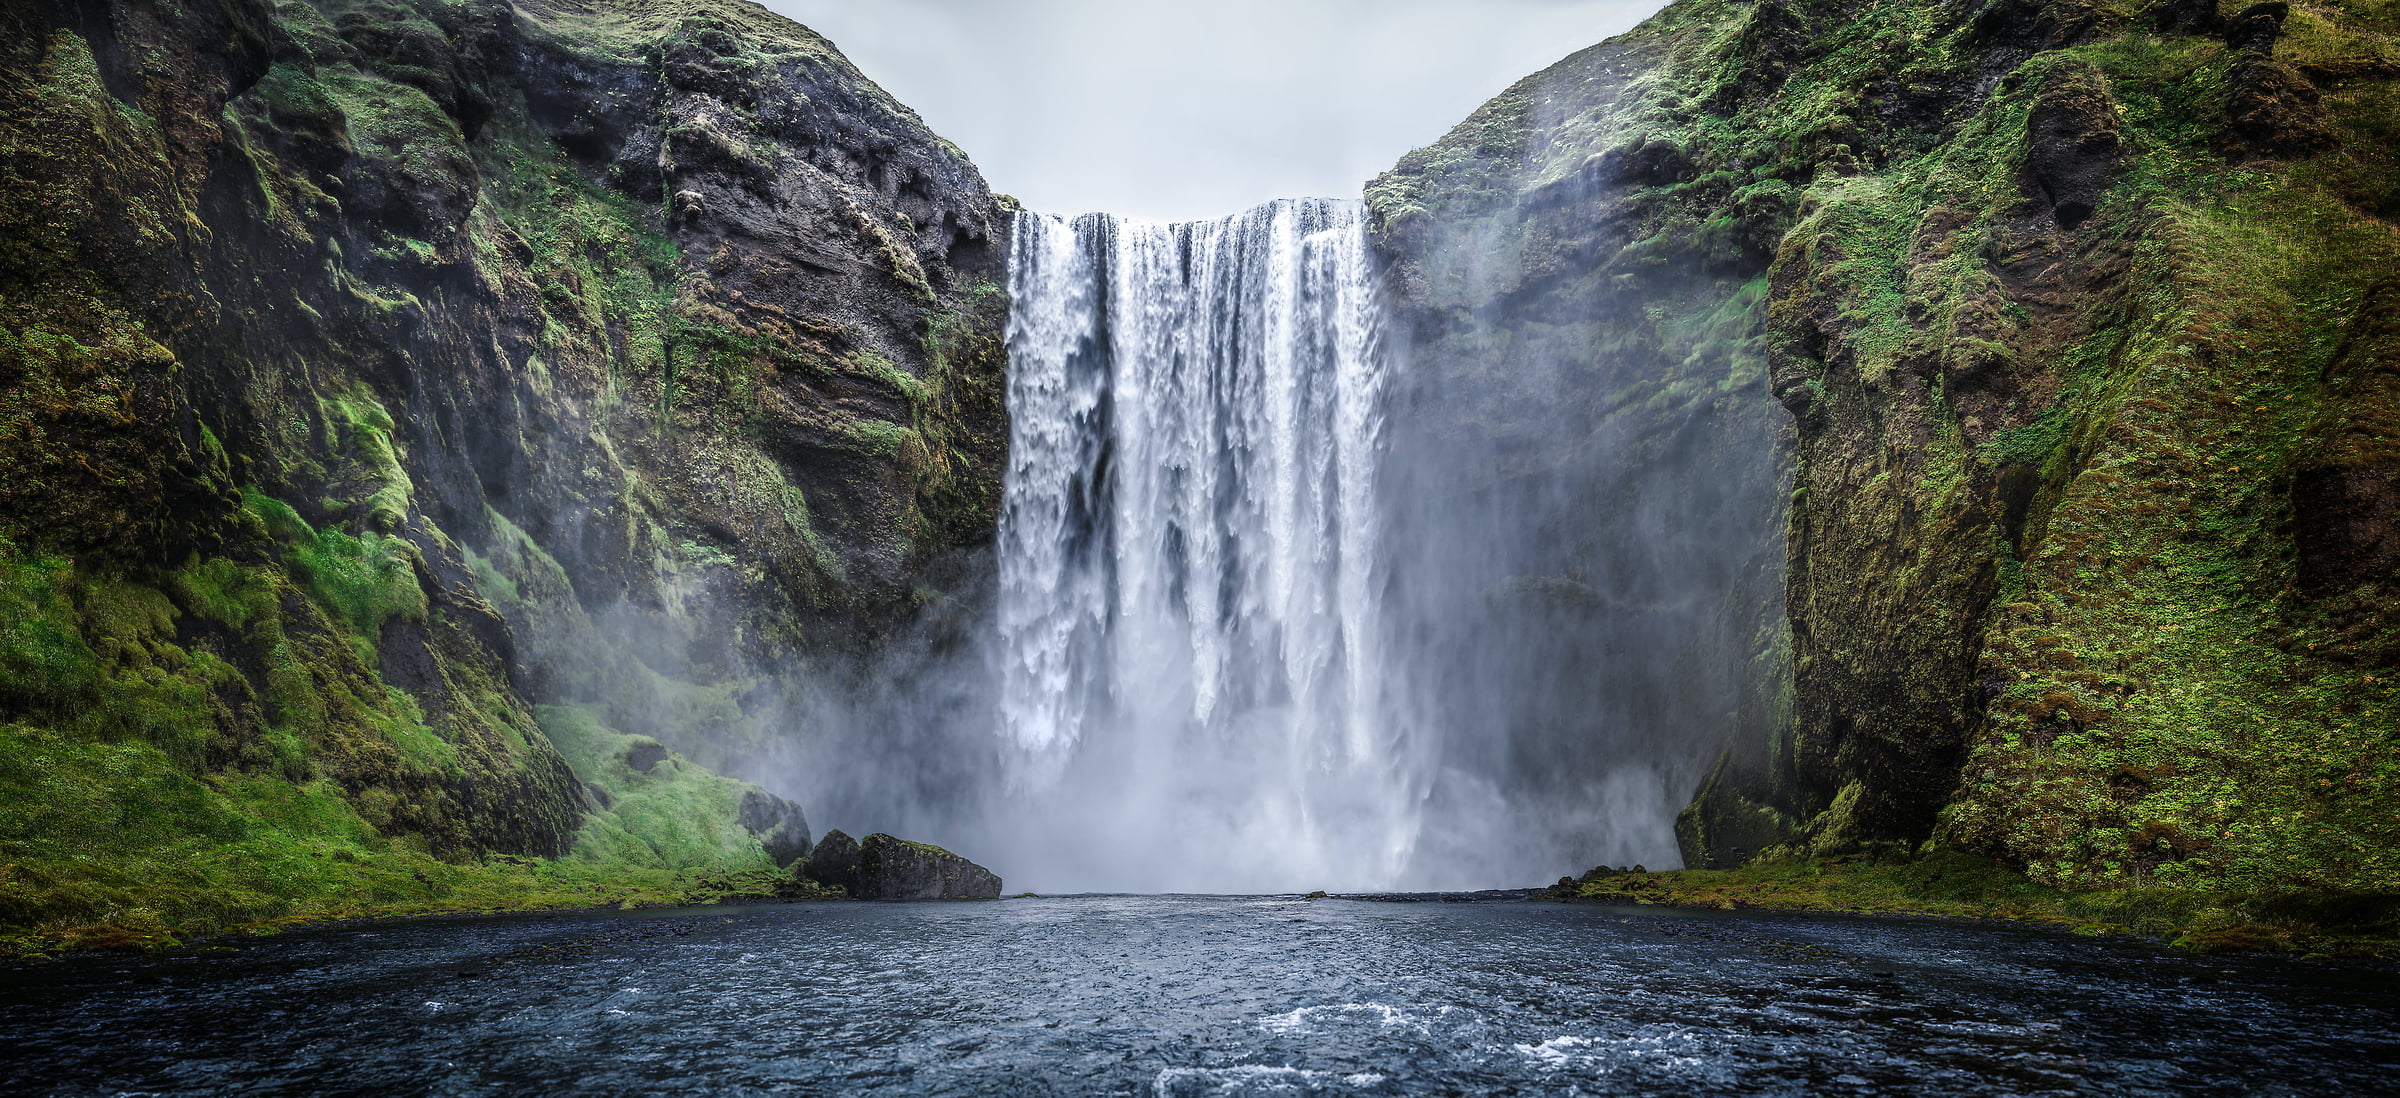 524 megapixels! A very high resolution, large-format VAST photo print of a big waterfall with a river in the foreground and green plants and moss on the sides; photograph created by Dan Piech at the Skógafoss Waterfall in Iceland.